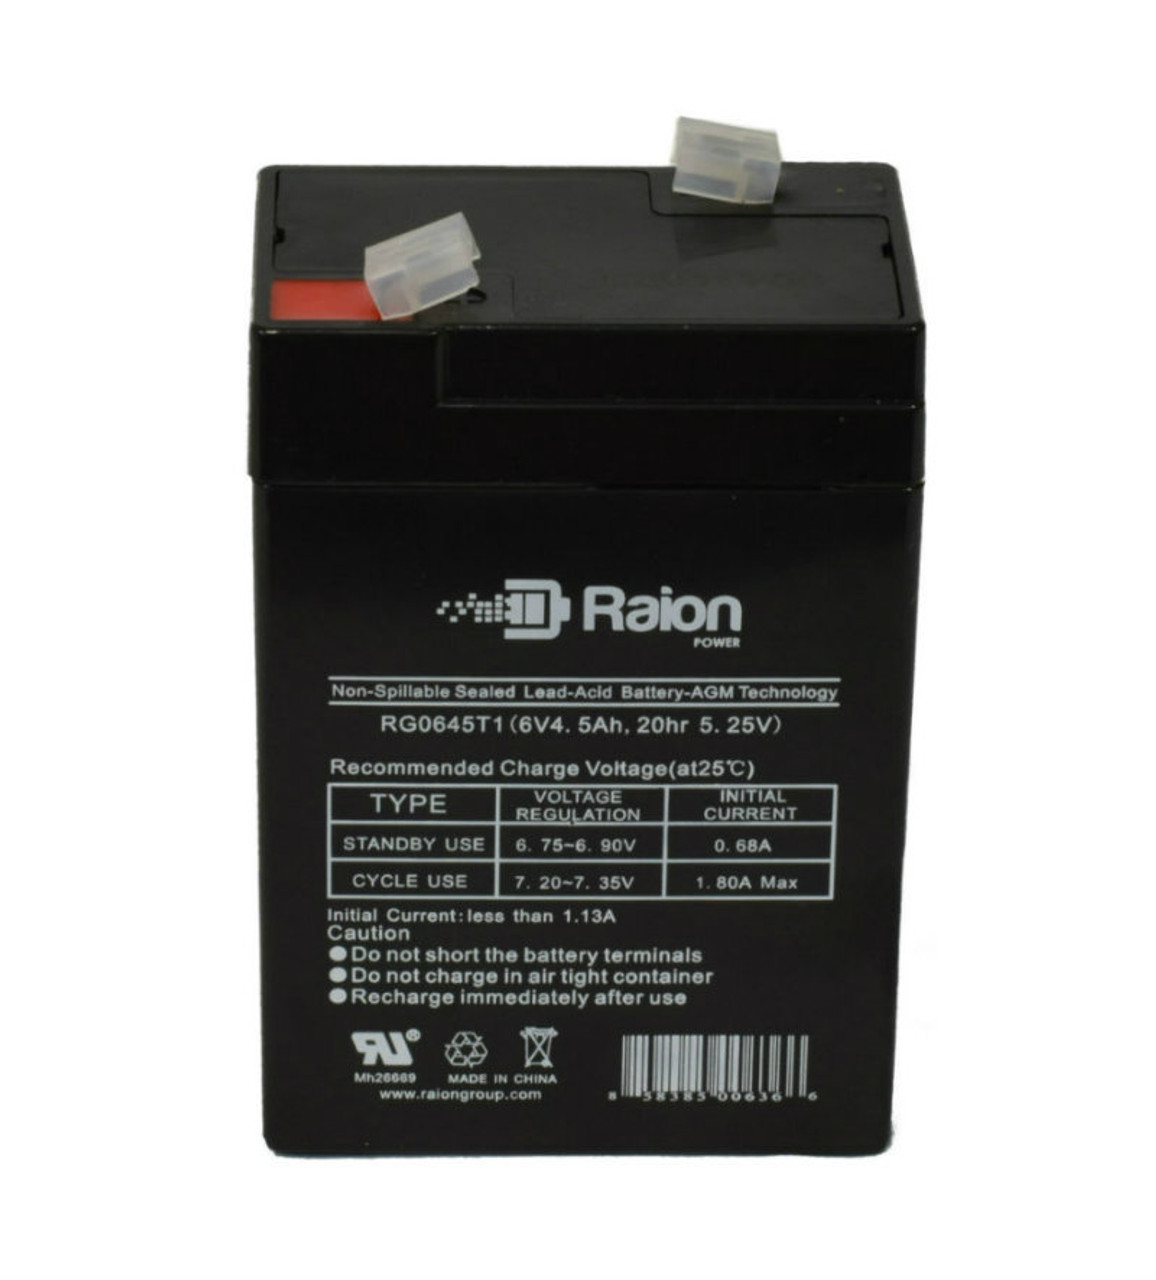 Raion Power RG0645T1 Replacement Battery Cartridge for Technacell EP640 Option - CHK DIM